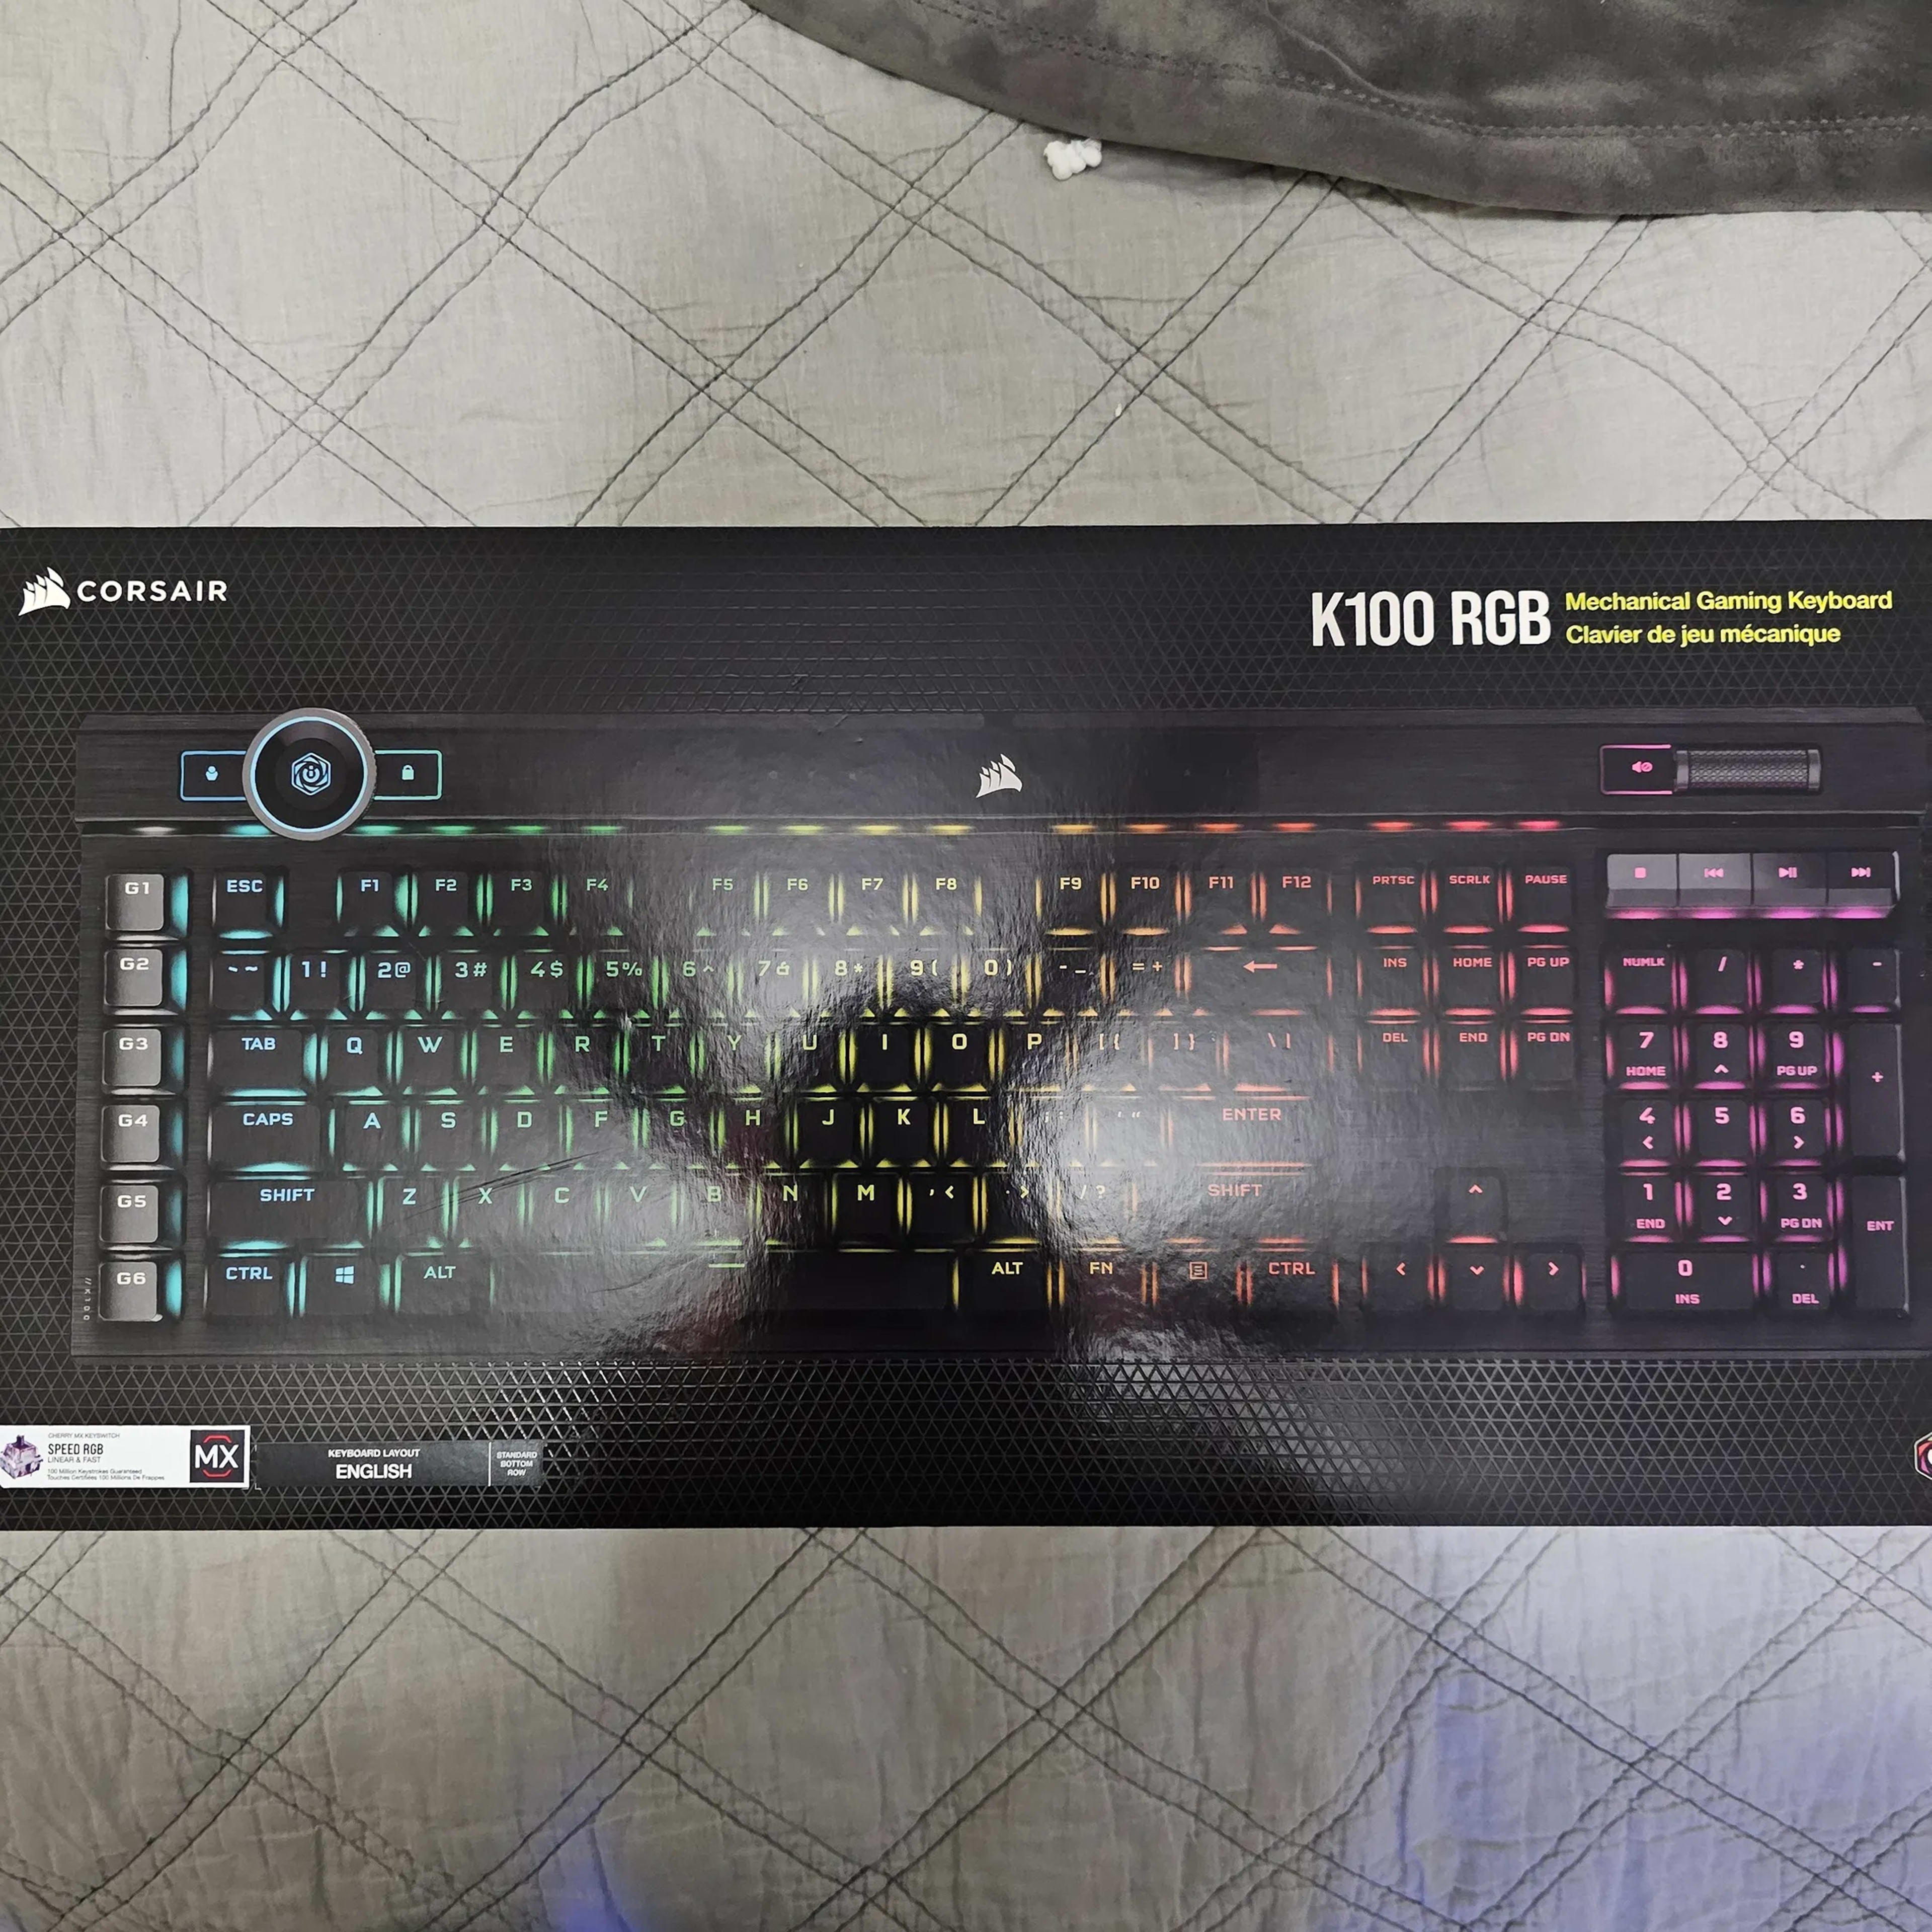 Corsair K100 RGB Mechanical Keyboard and RGB Full size mouse pad.